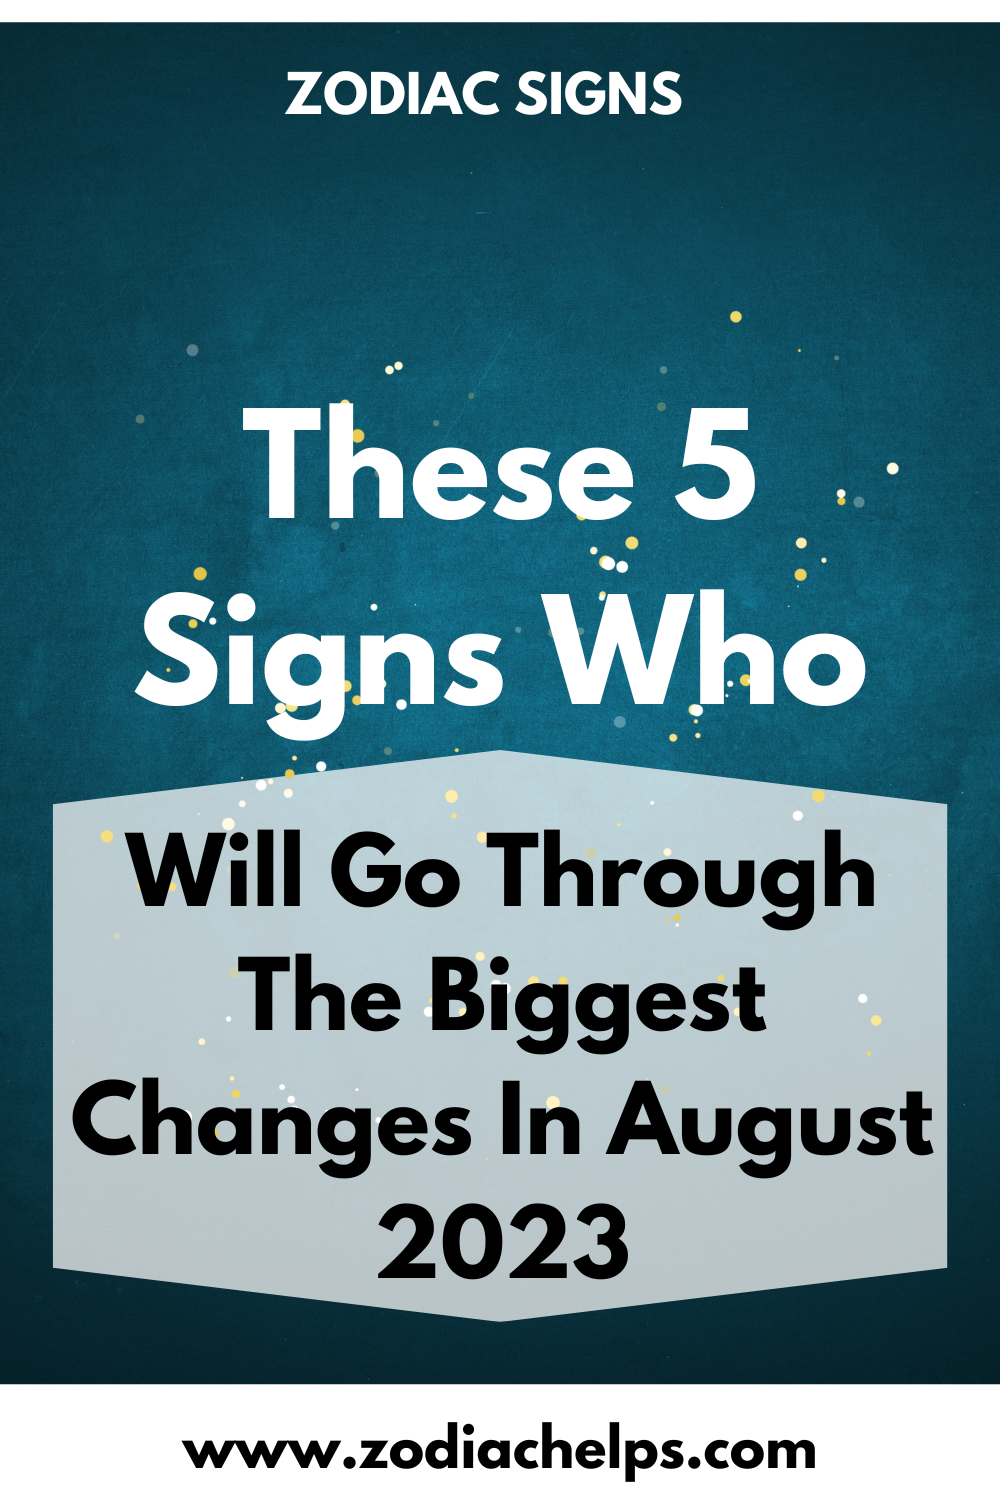 These 5 Signs Who Will Go Through The Biggest Changes In August 2023